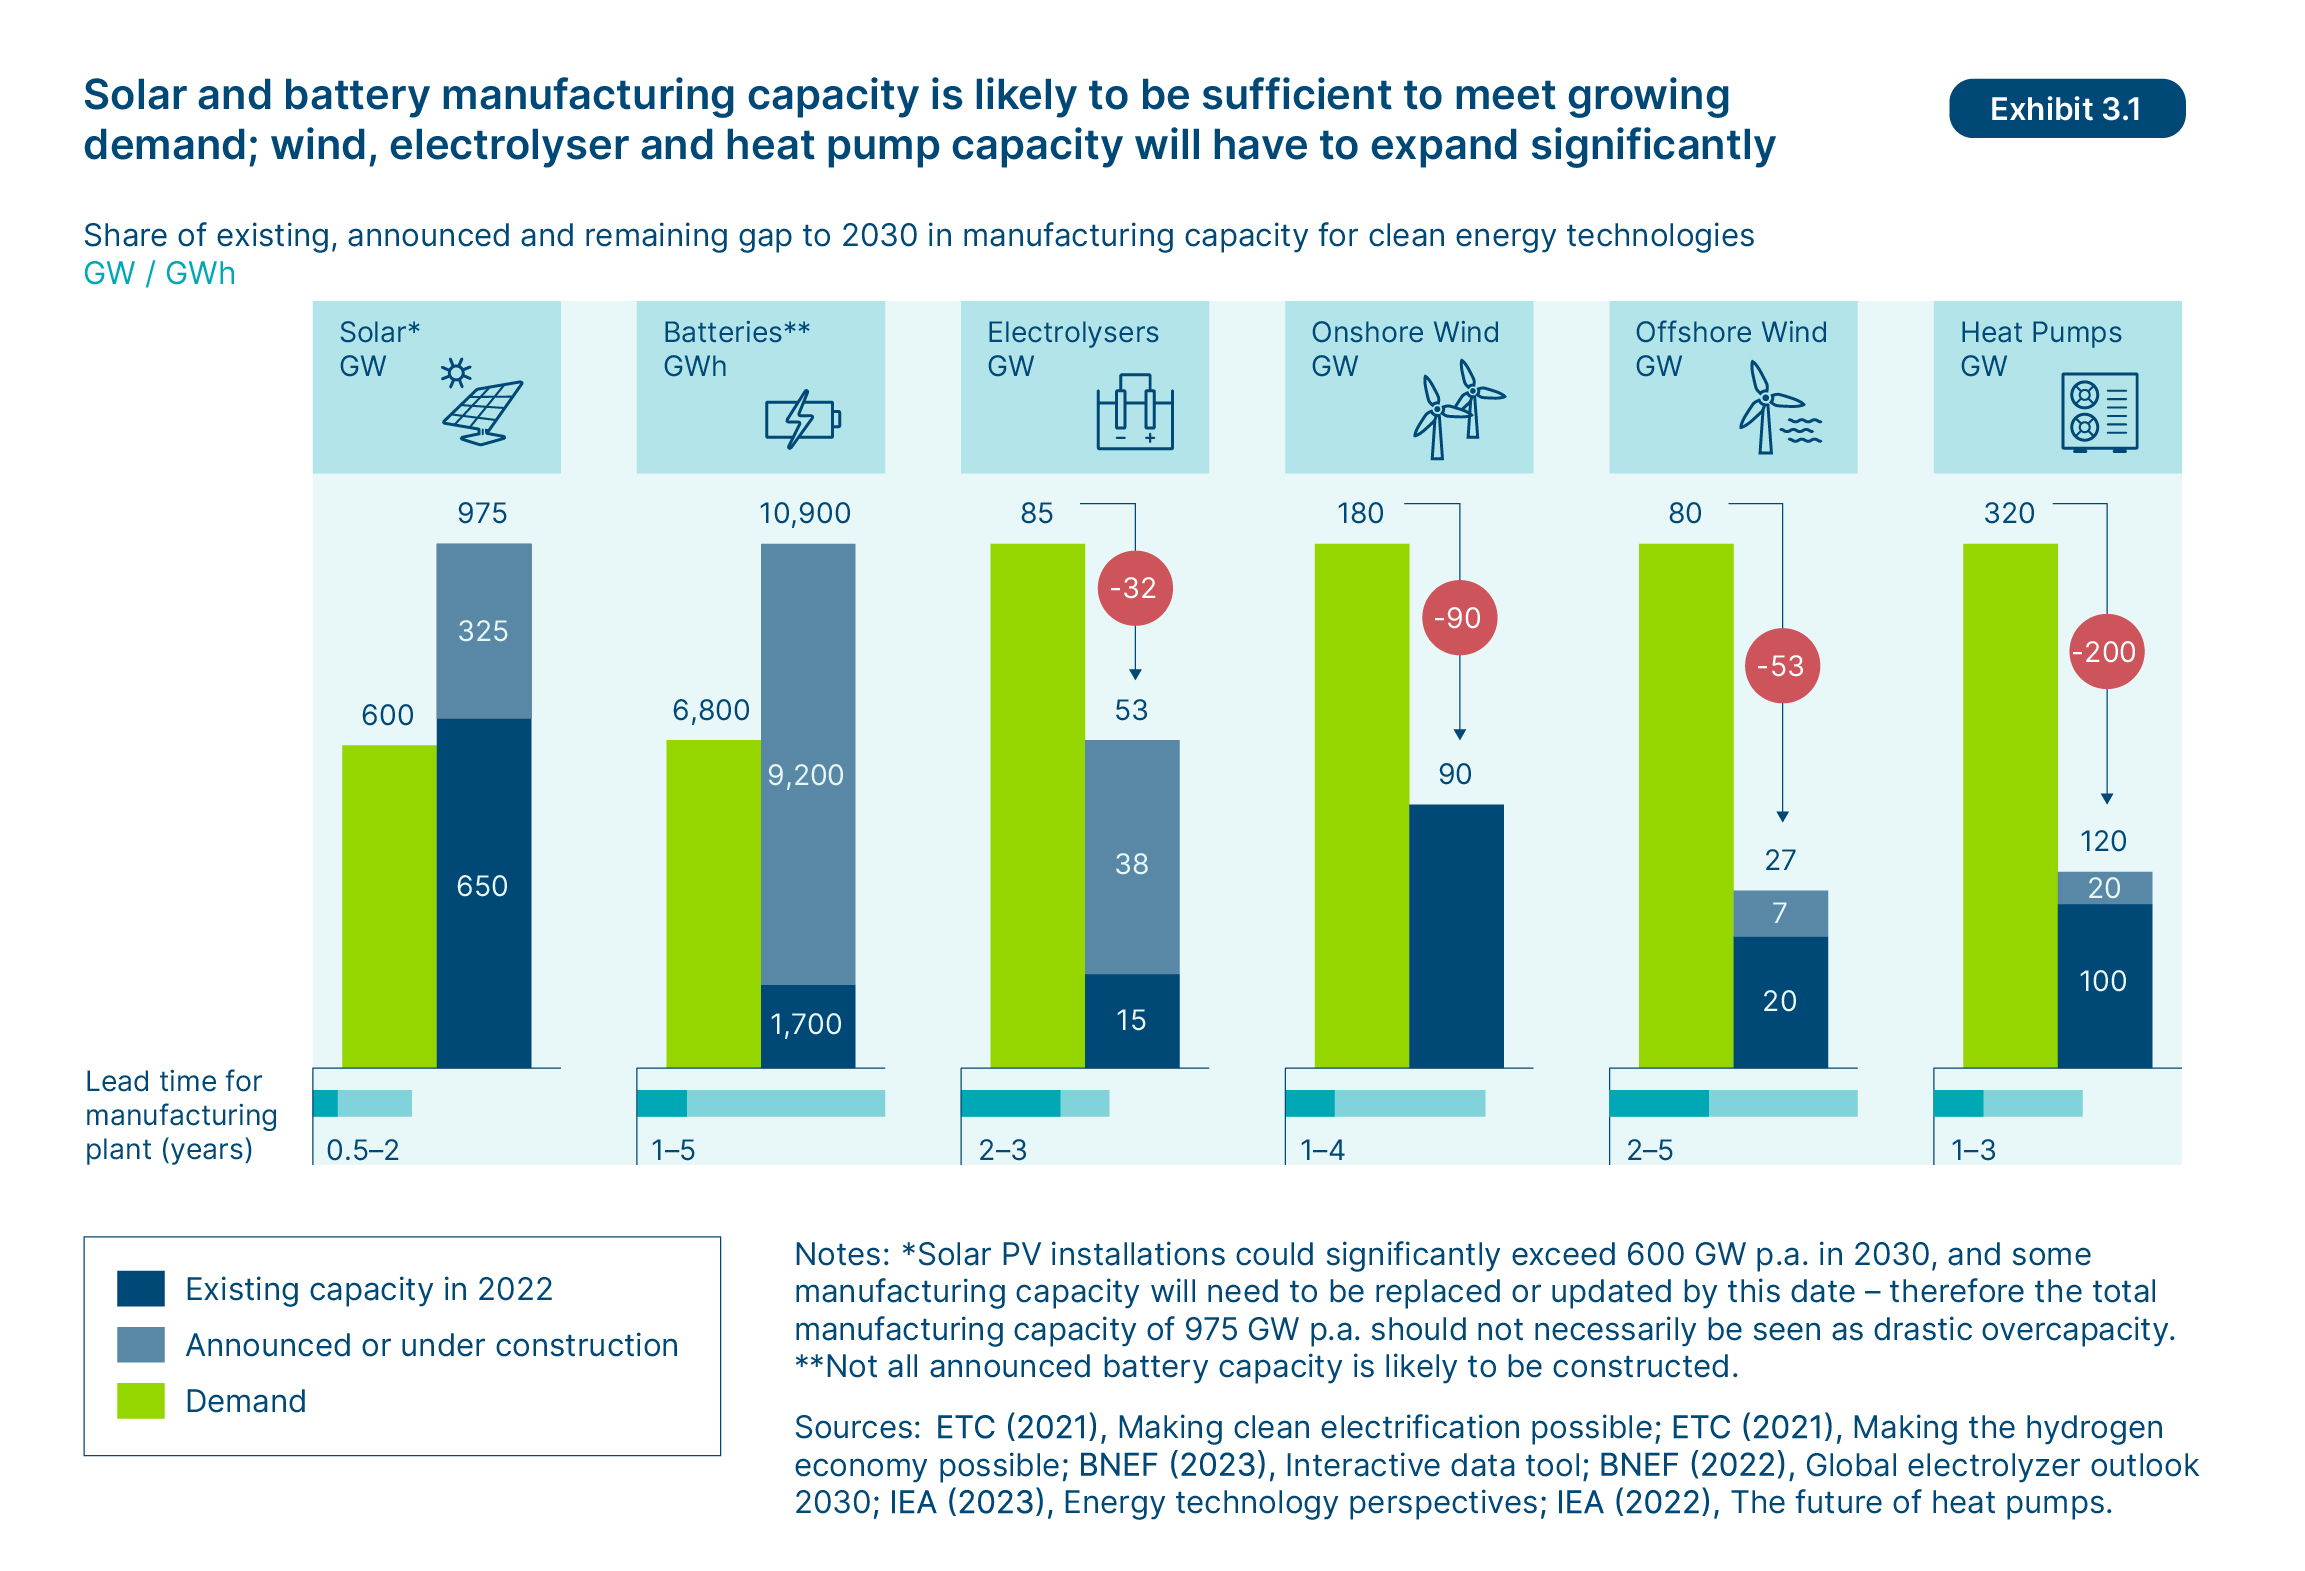 Solar and battery manufacturing capacity is likely to be sufficient to meet growing demand; wind, electrolyser and heat pump capacity will have to expand significantly